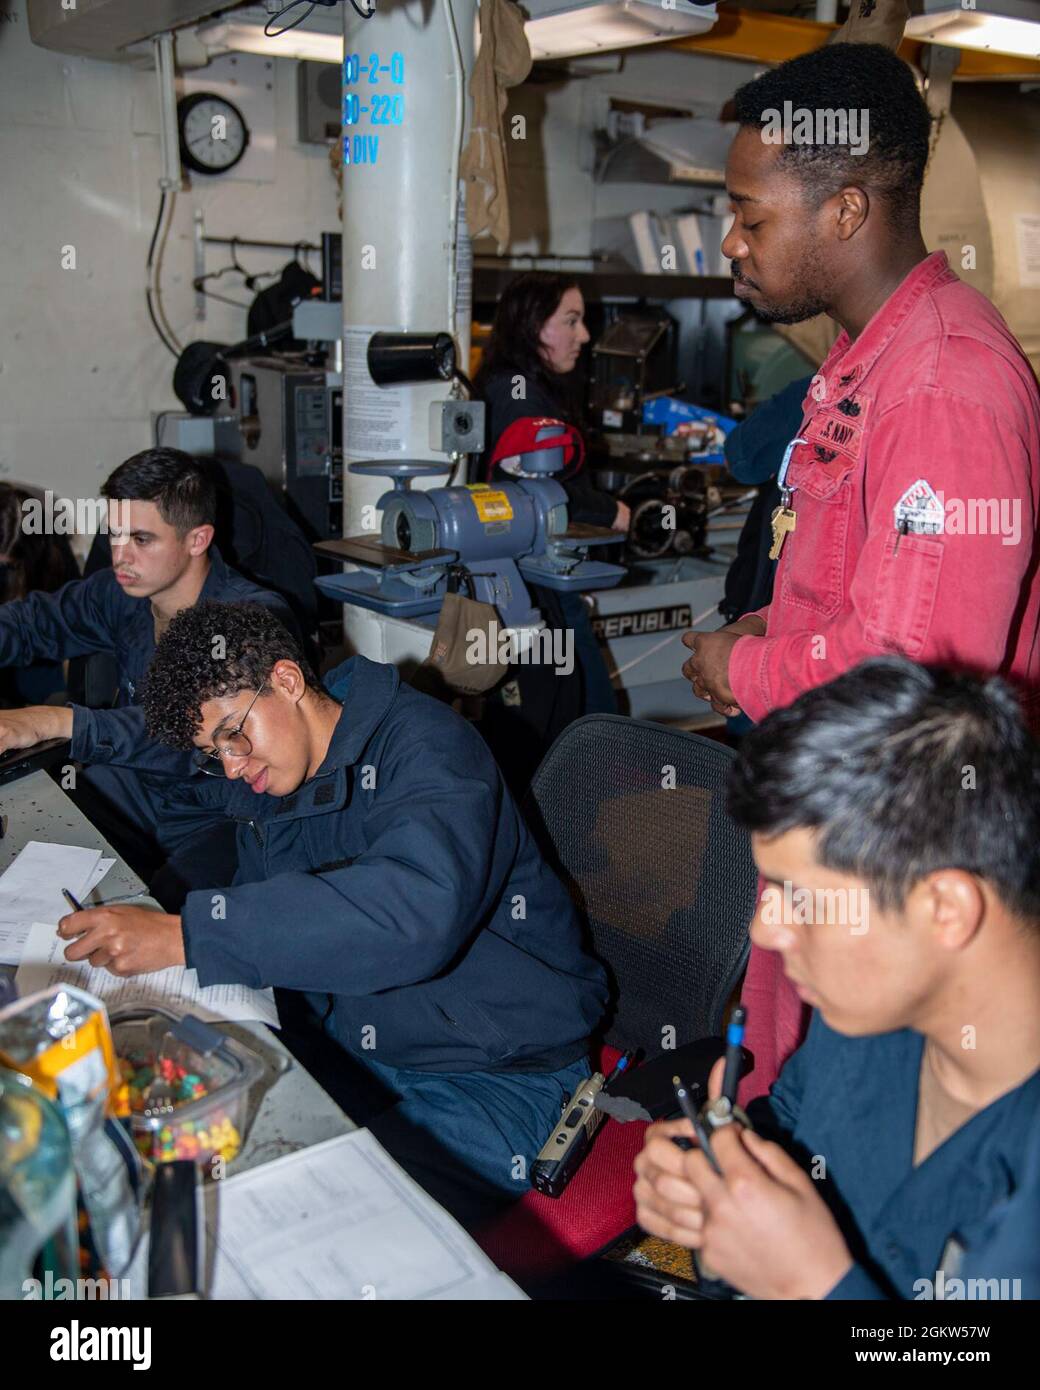 210705-N-HG846-2013 TASMA SEA (July 5, 2021) – Sailors take a damage control exam aboard Arleigh Burke-class guided-missile destroyer USS Rafael Peralta (DDG 115). Rafael Peralta is assigned to Commander, Task Force 71/Destroyer Squadron (DESRON) 15, the Navy's largest forward-deployed DESRON and U.S. 7th Fleet's principal surface force. Stock Photo